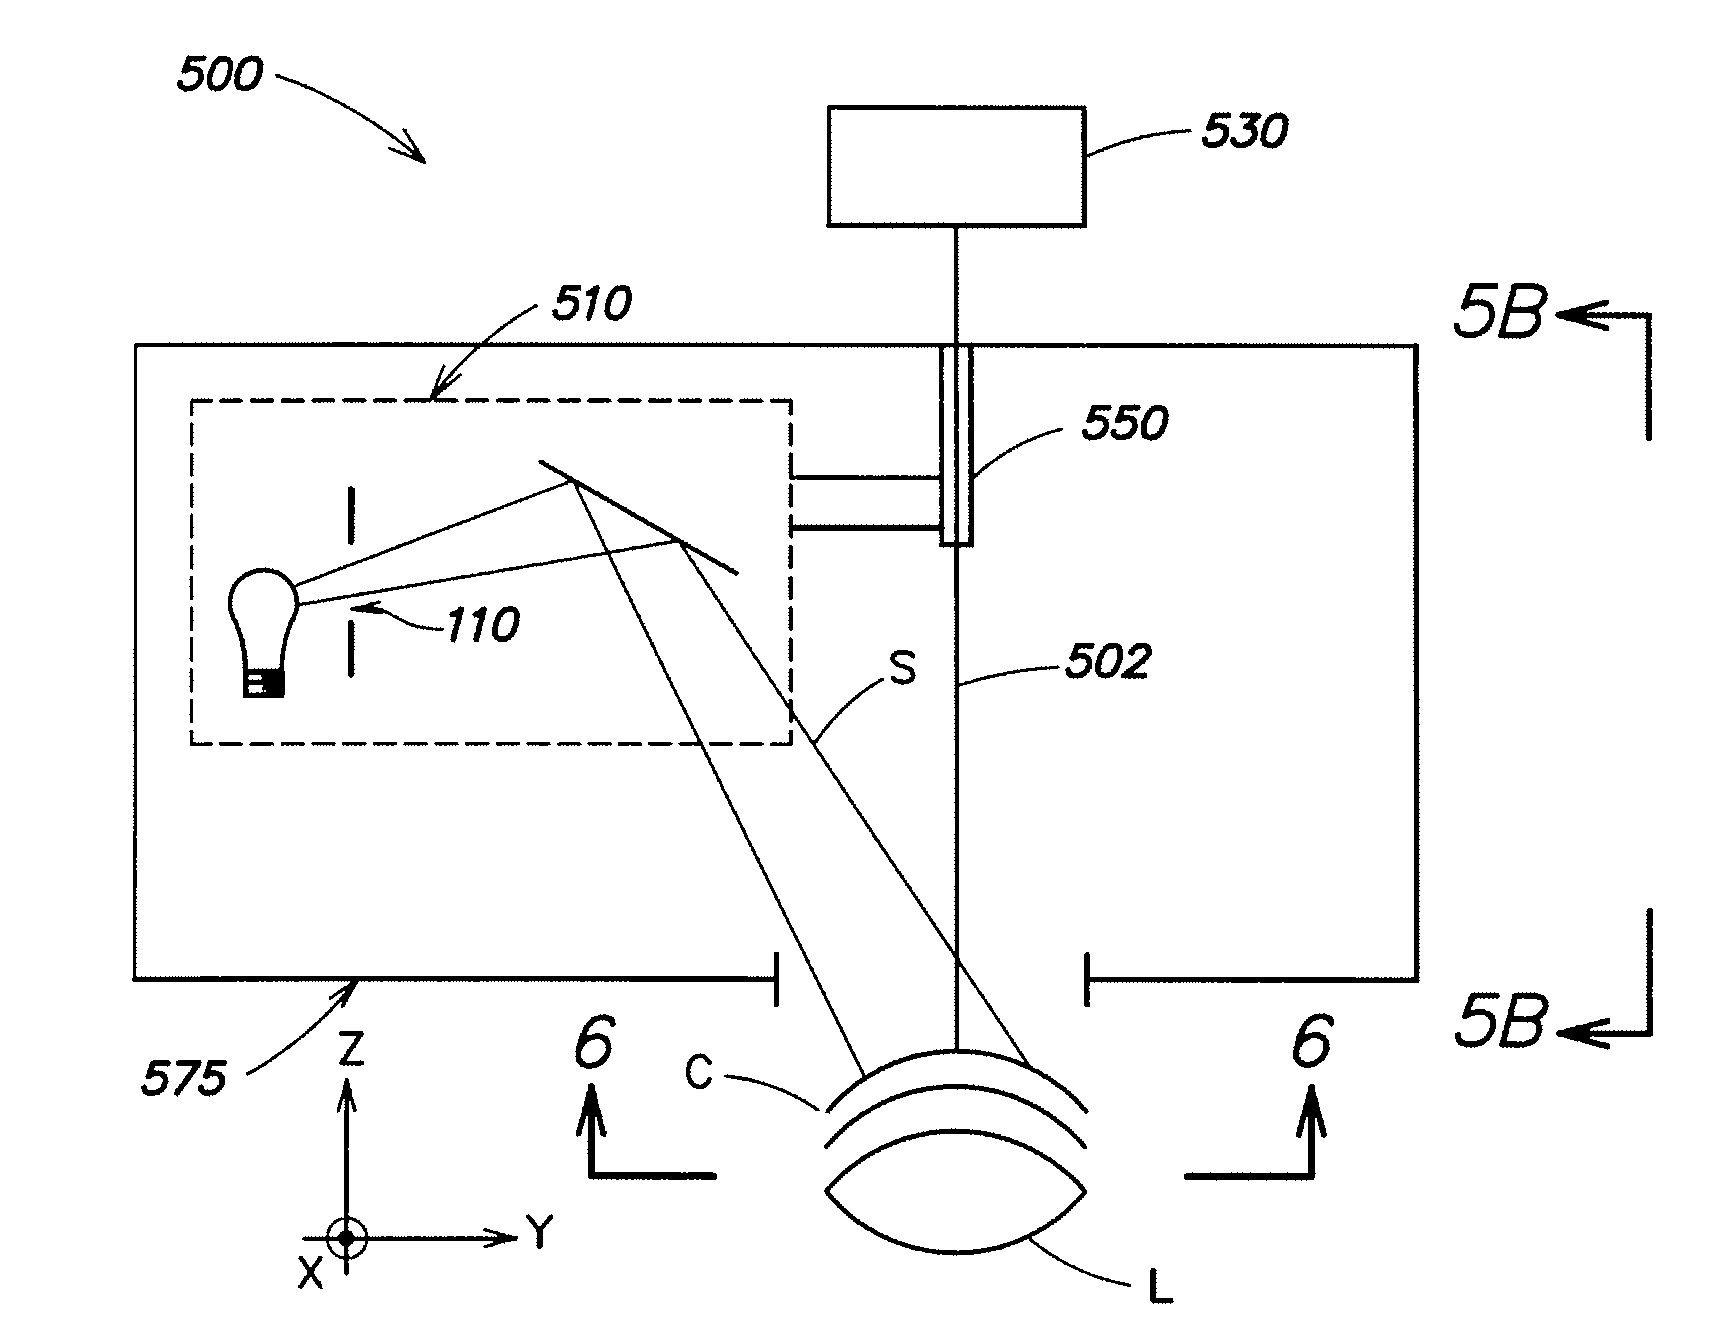 Eye Measurement Apparatus and a Method of Using Same